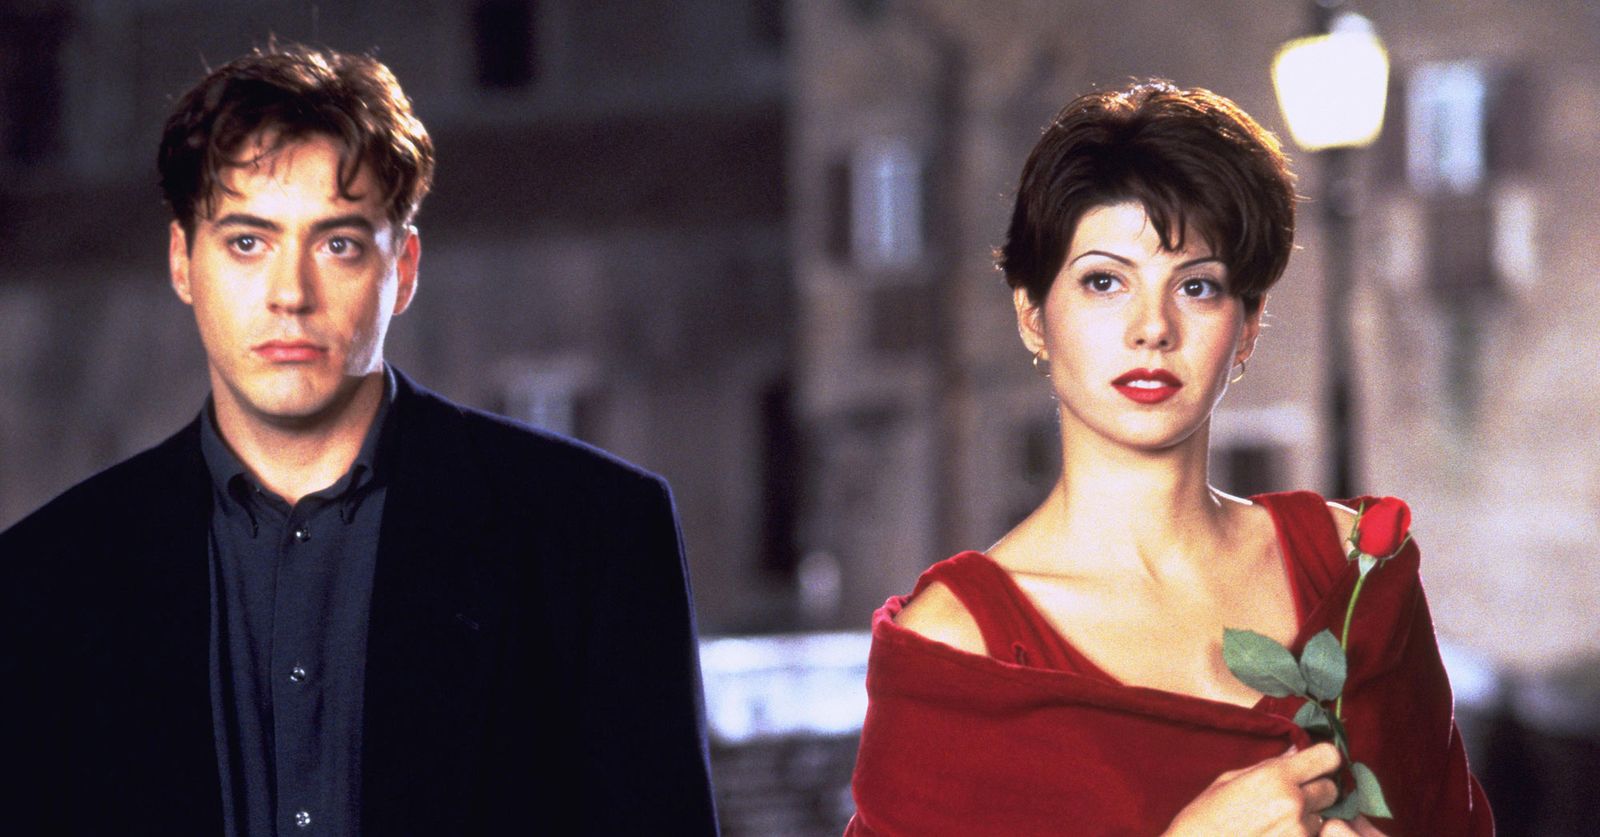 marissa tomei and robert downey jr in only you